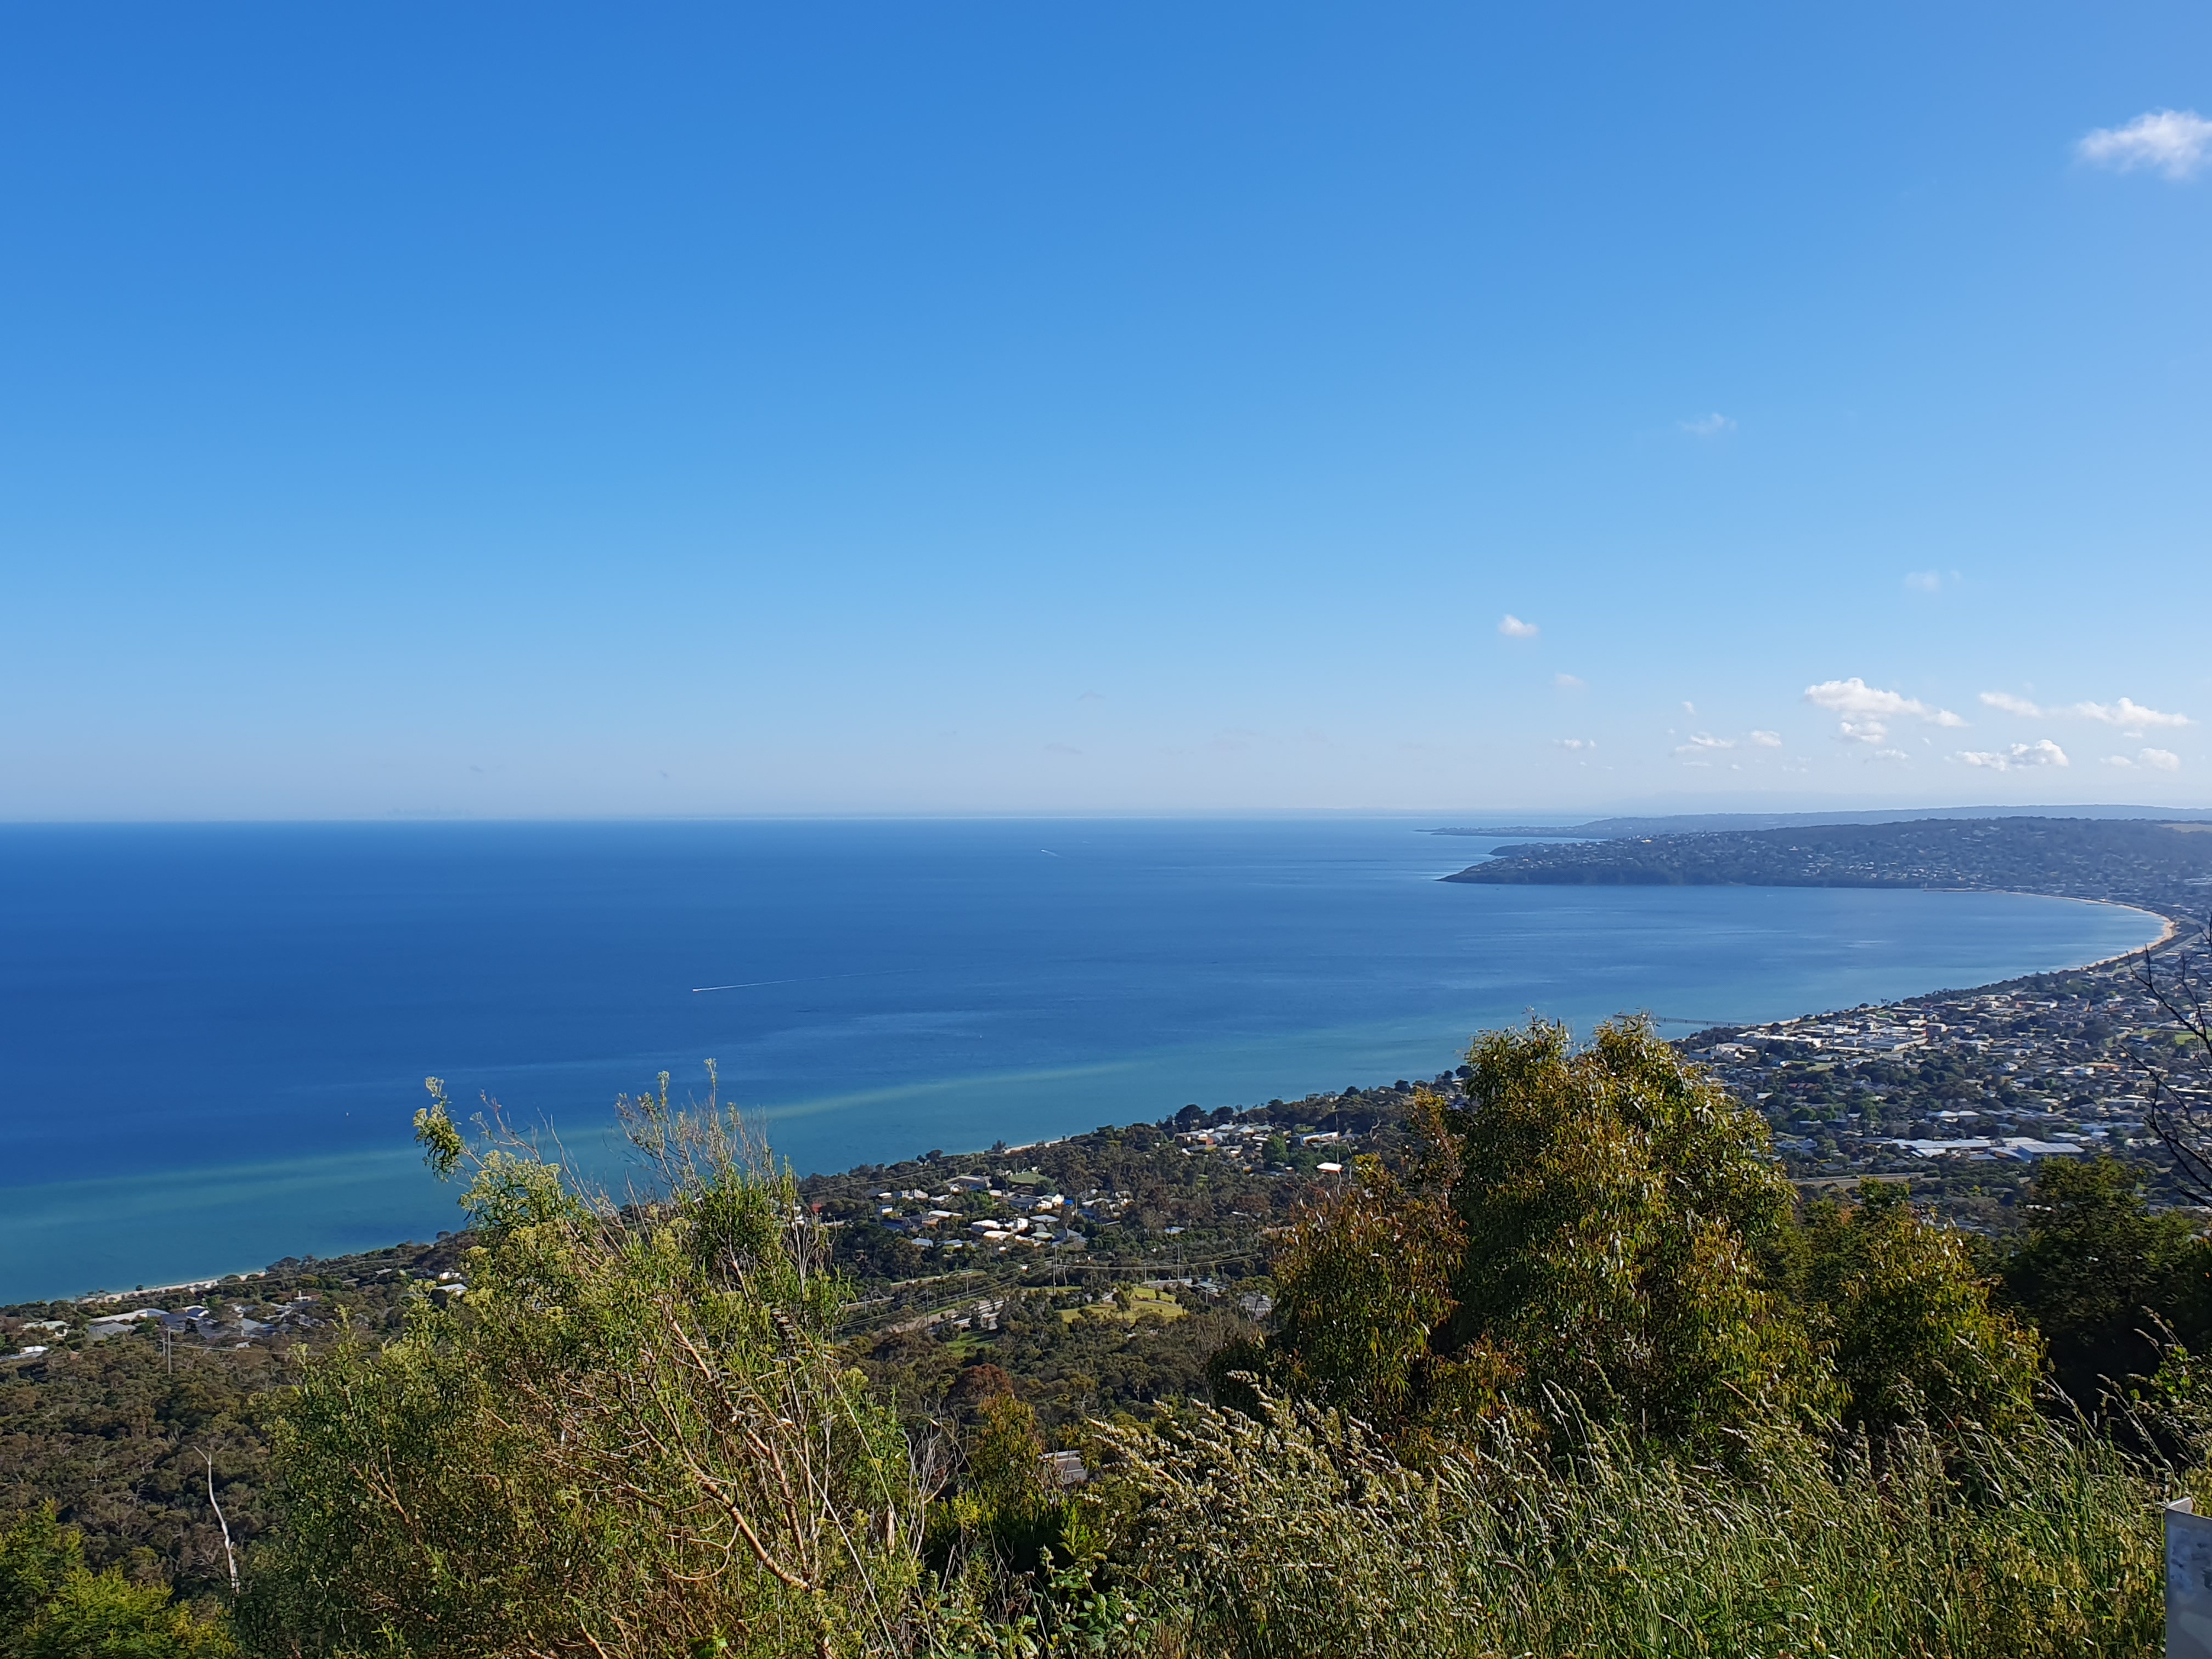 view from climb to Arthurs Seat of Port Philip Bay, Melbourne
faintly in the distance and, extremely faintly, Kinglake